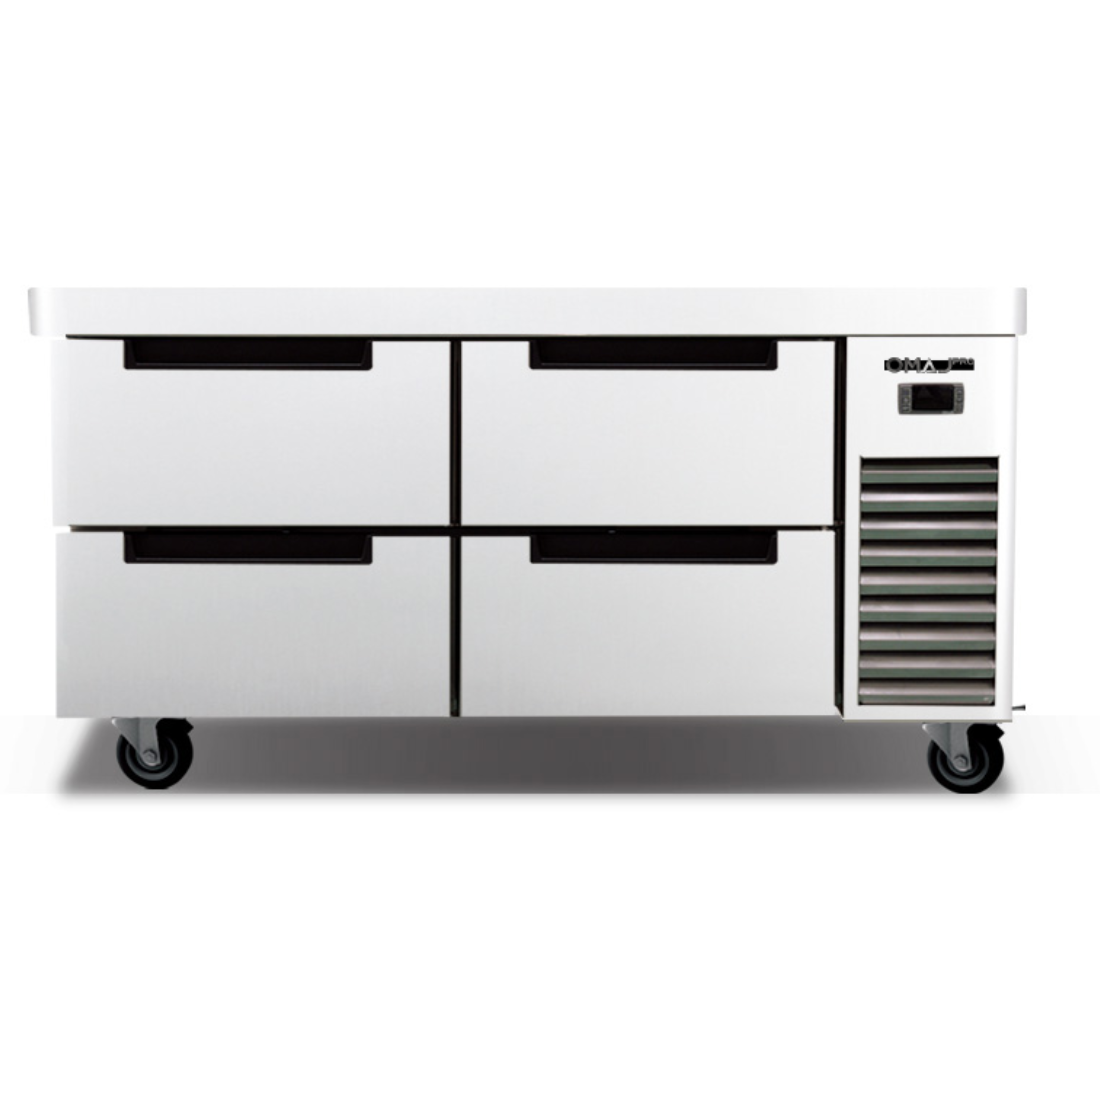 OMAJ PRO Low Hight Worktop Chiller With 4 Drawers|mkayn|مكاين